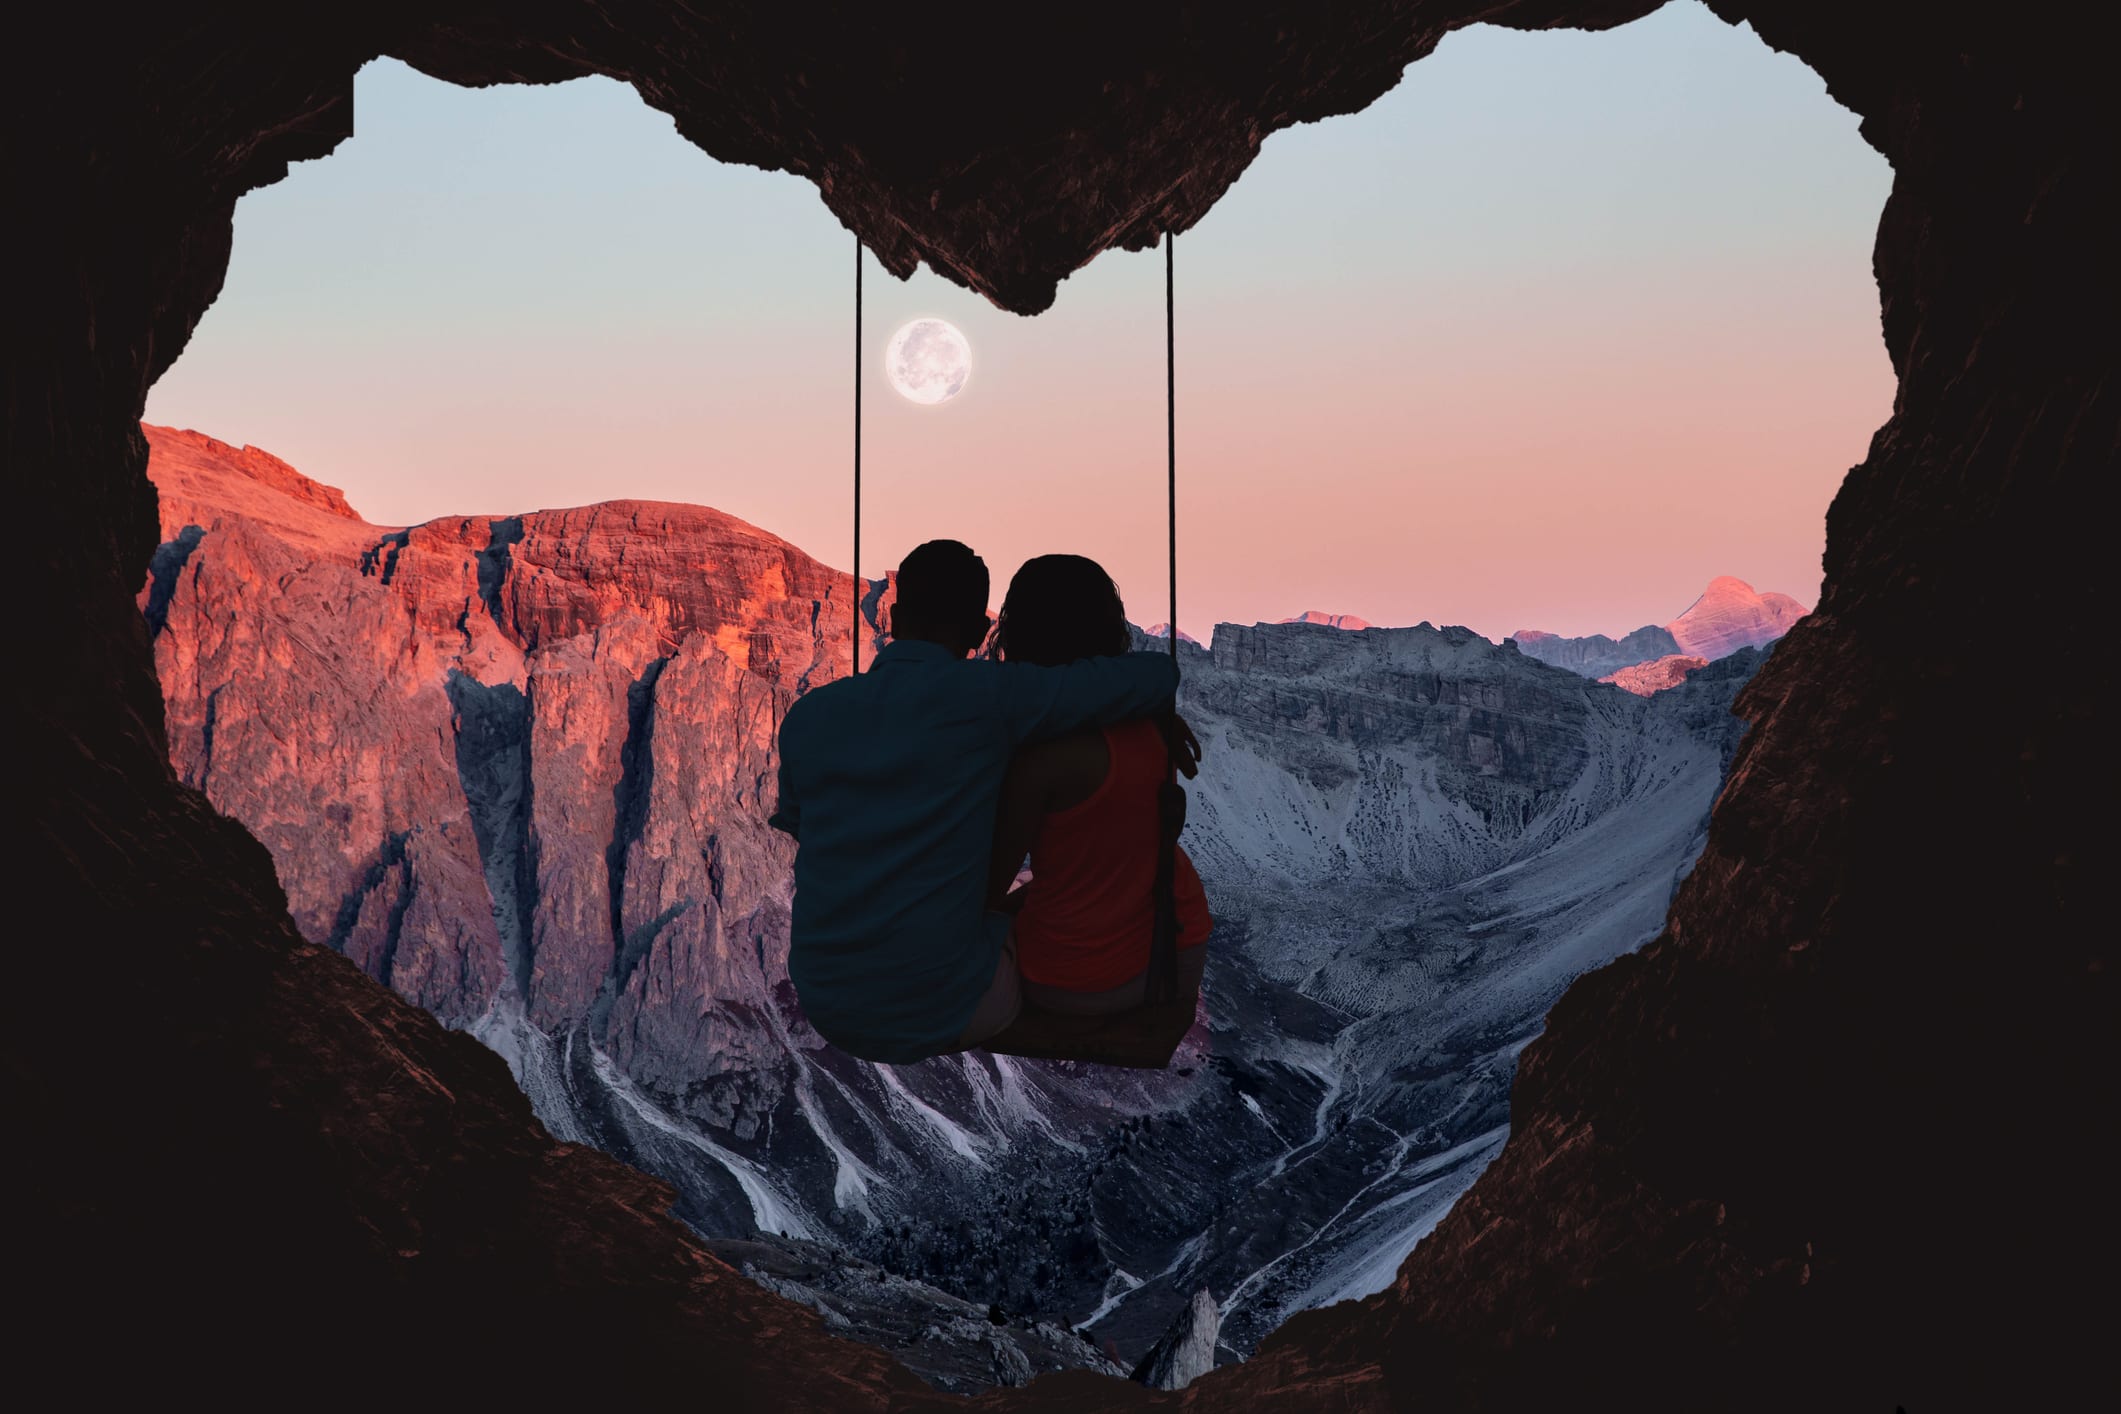 Composition of the Alps mountains during sunset with full moon and couple on swing from a heart shape cave.